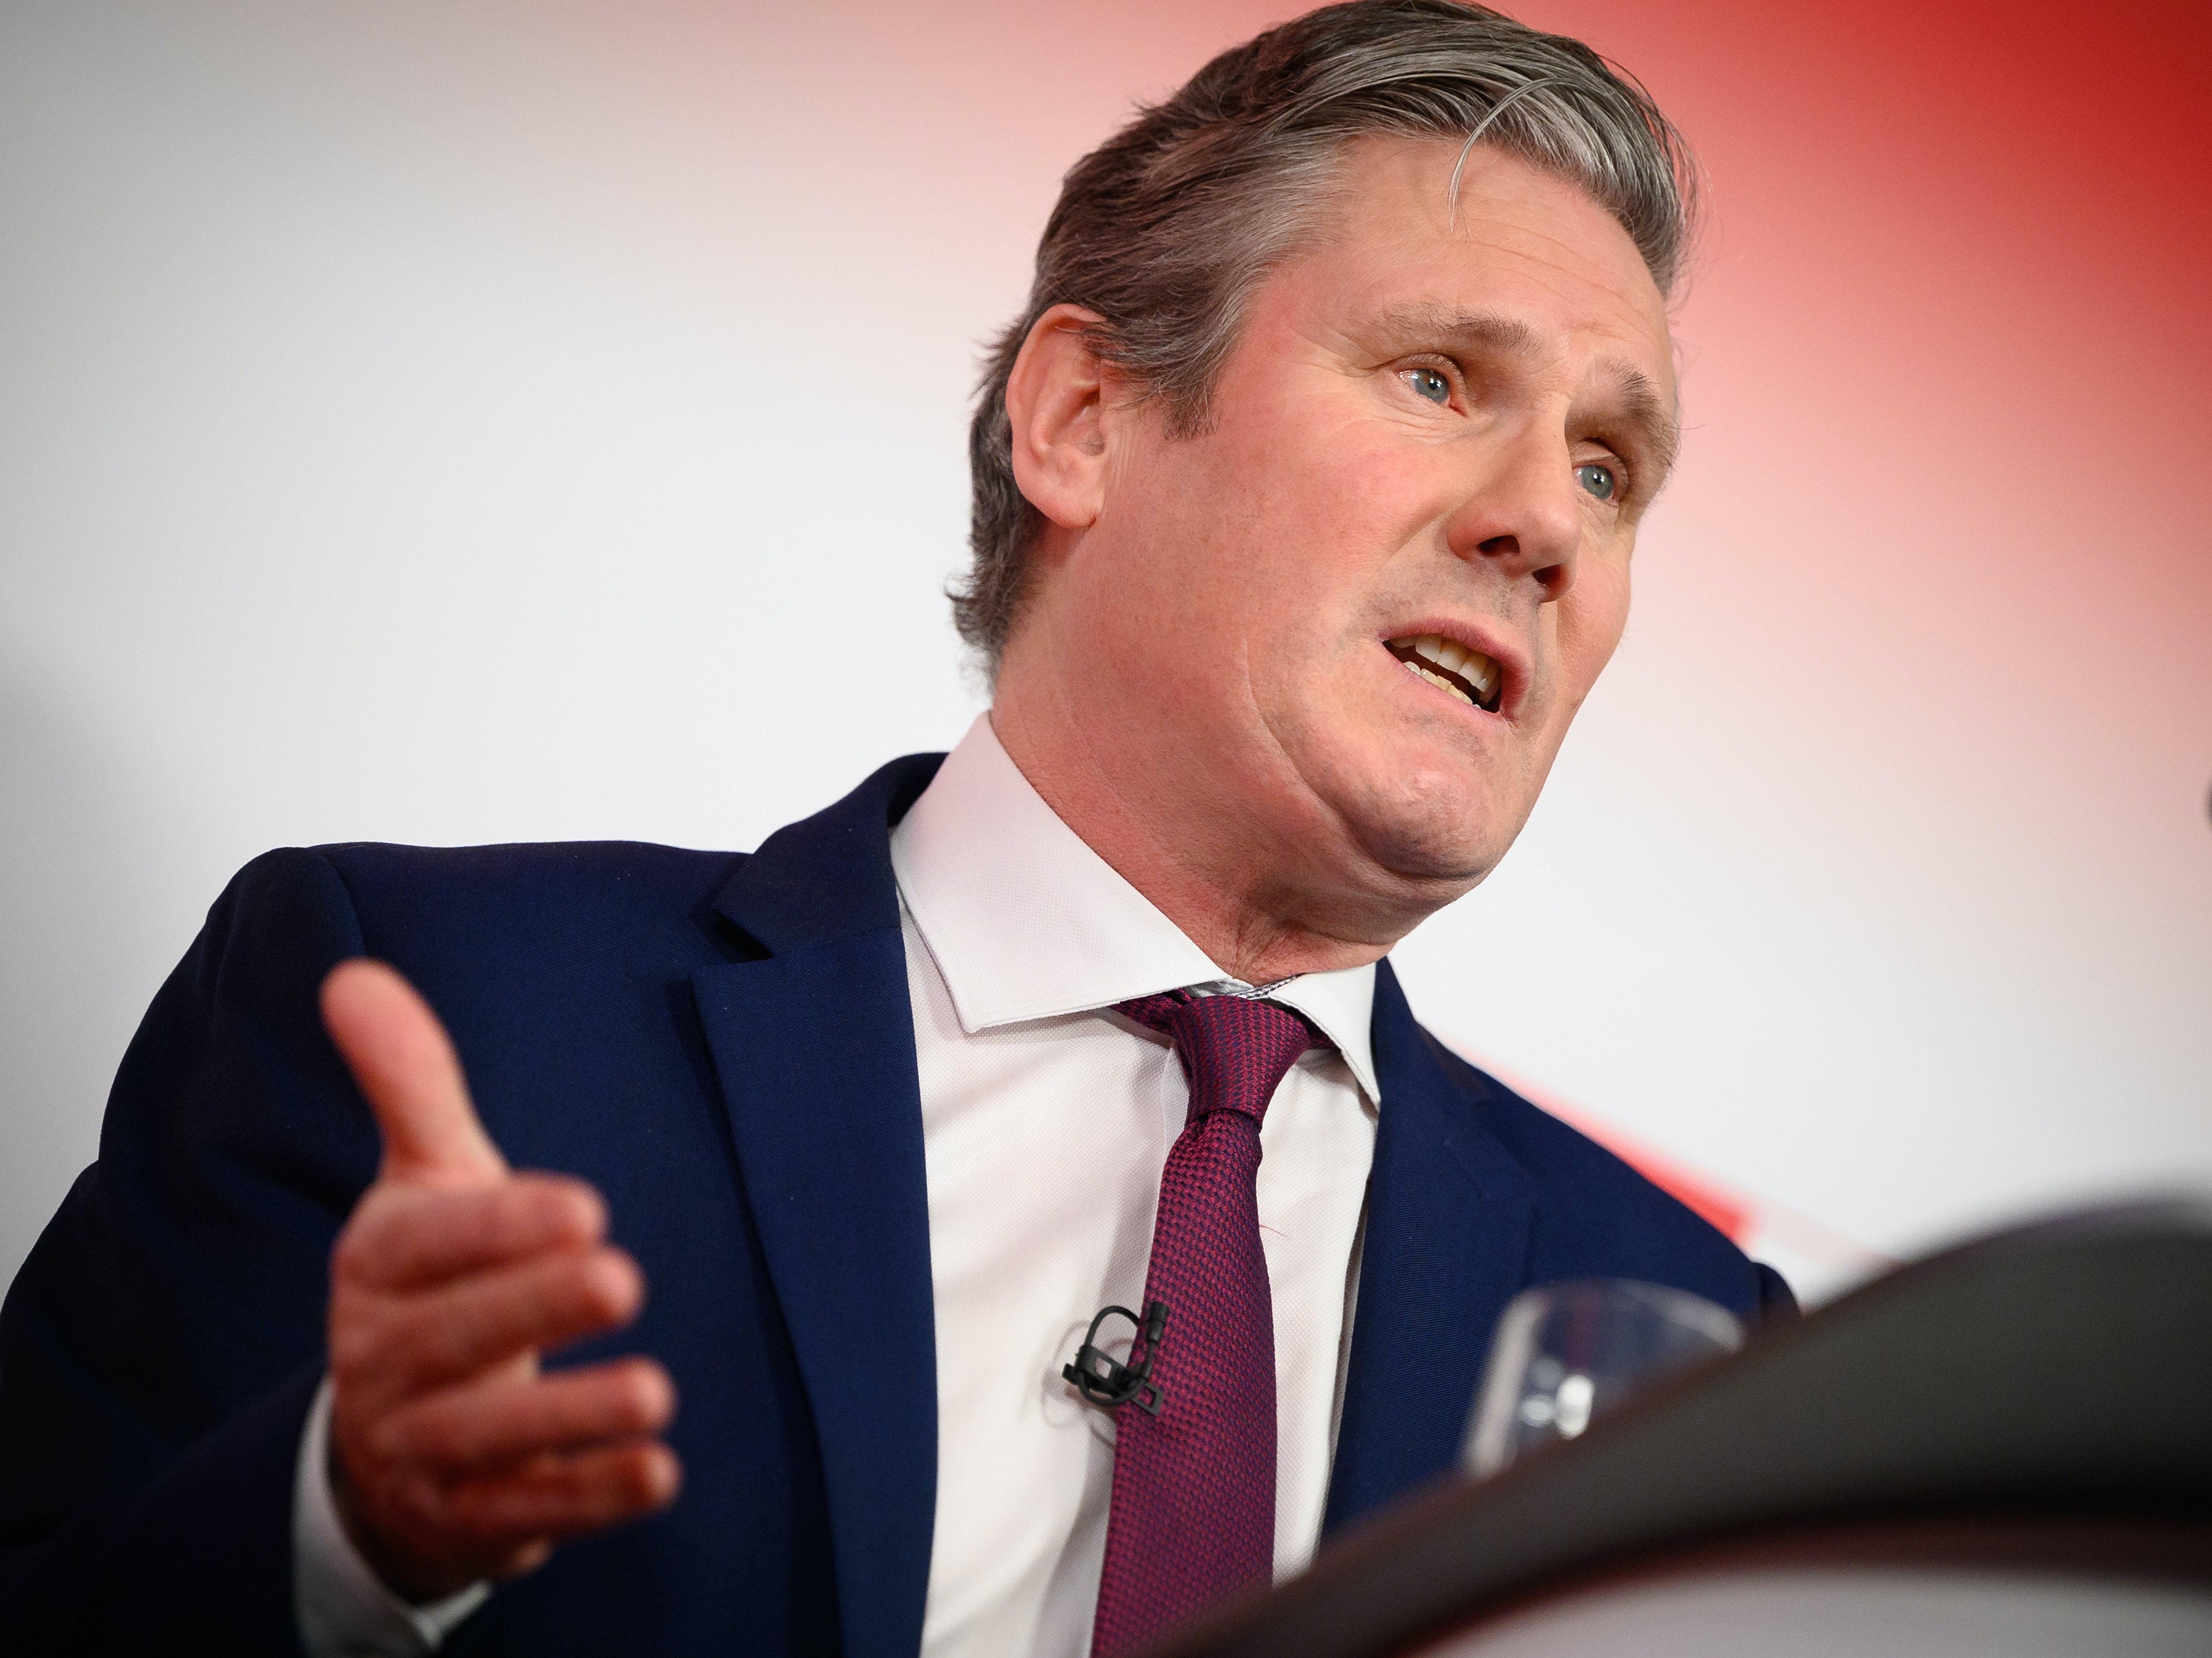 ‘A vote for Labour is a vote to support our nurses’ – Keir Starmer at the launch of Labour’s May elections campaign